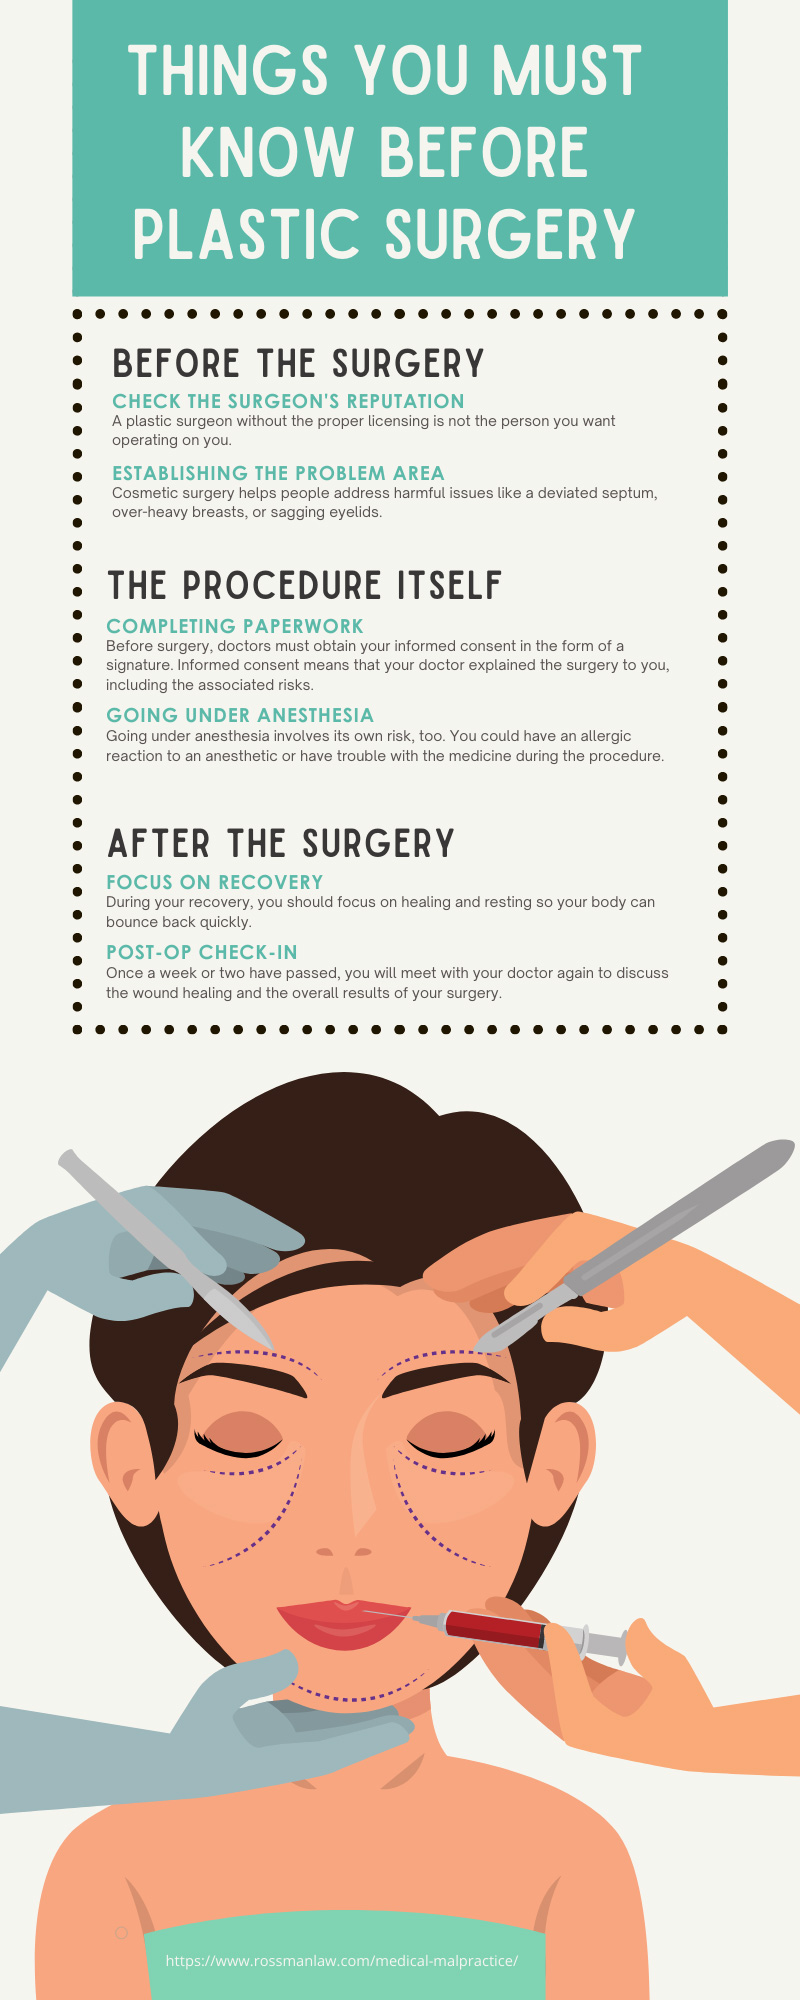 Things You Must Know Before Plastic Surgery